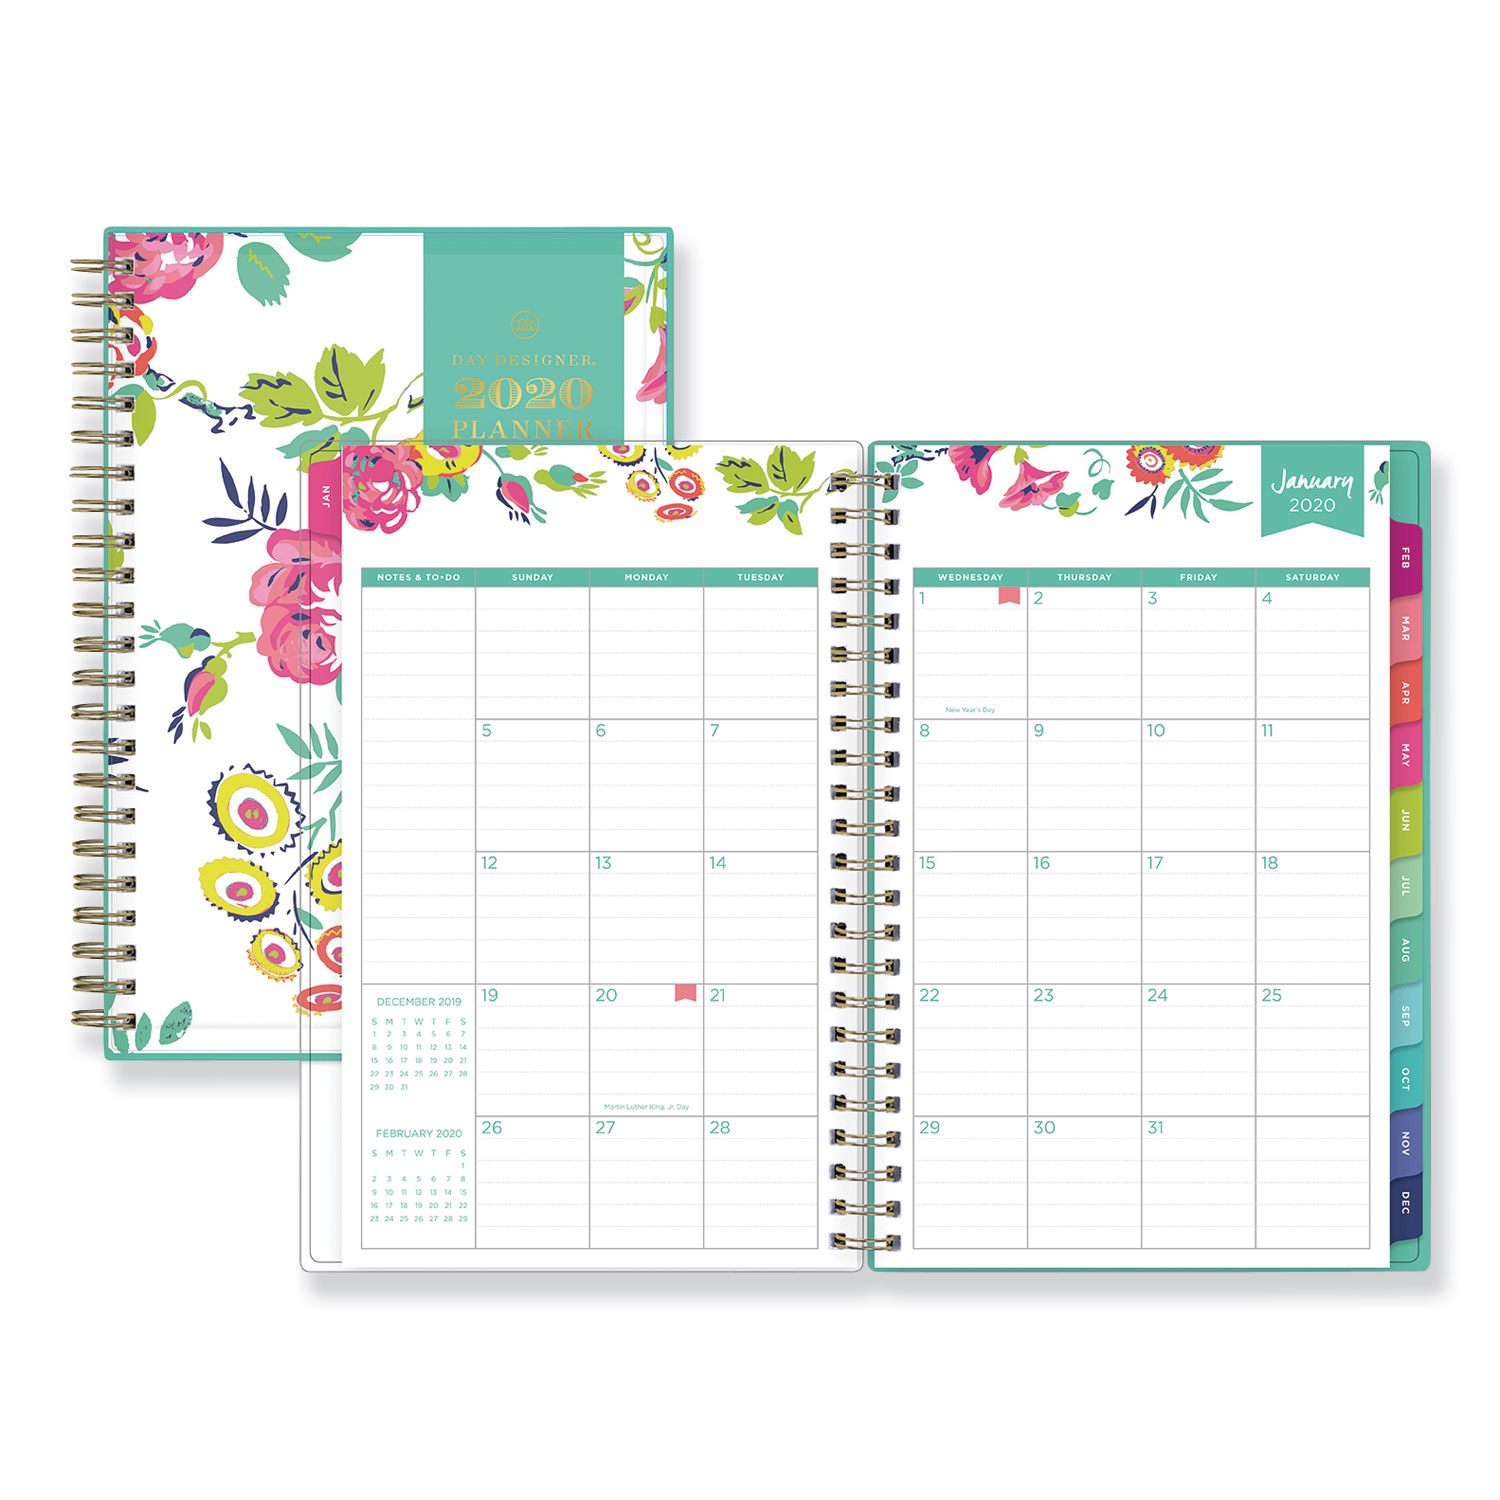  Blue Sky BLS103619 Day Designer CYO Weekly/Monthly Planner, 8 x 5, White/Floral, 2020 (BLS103619) 